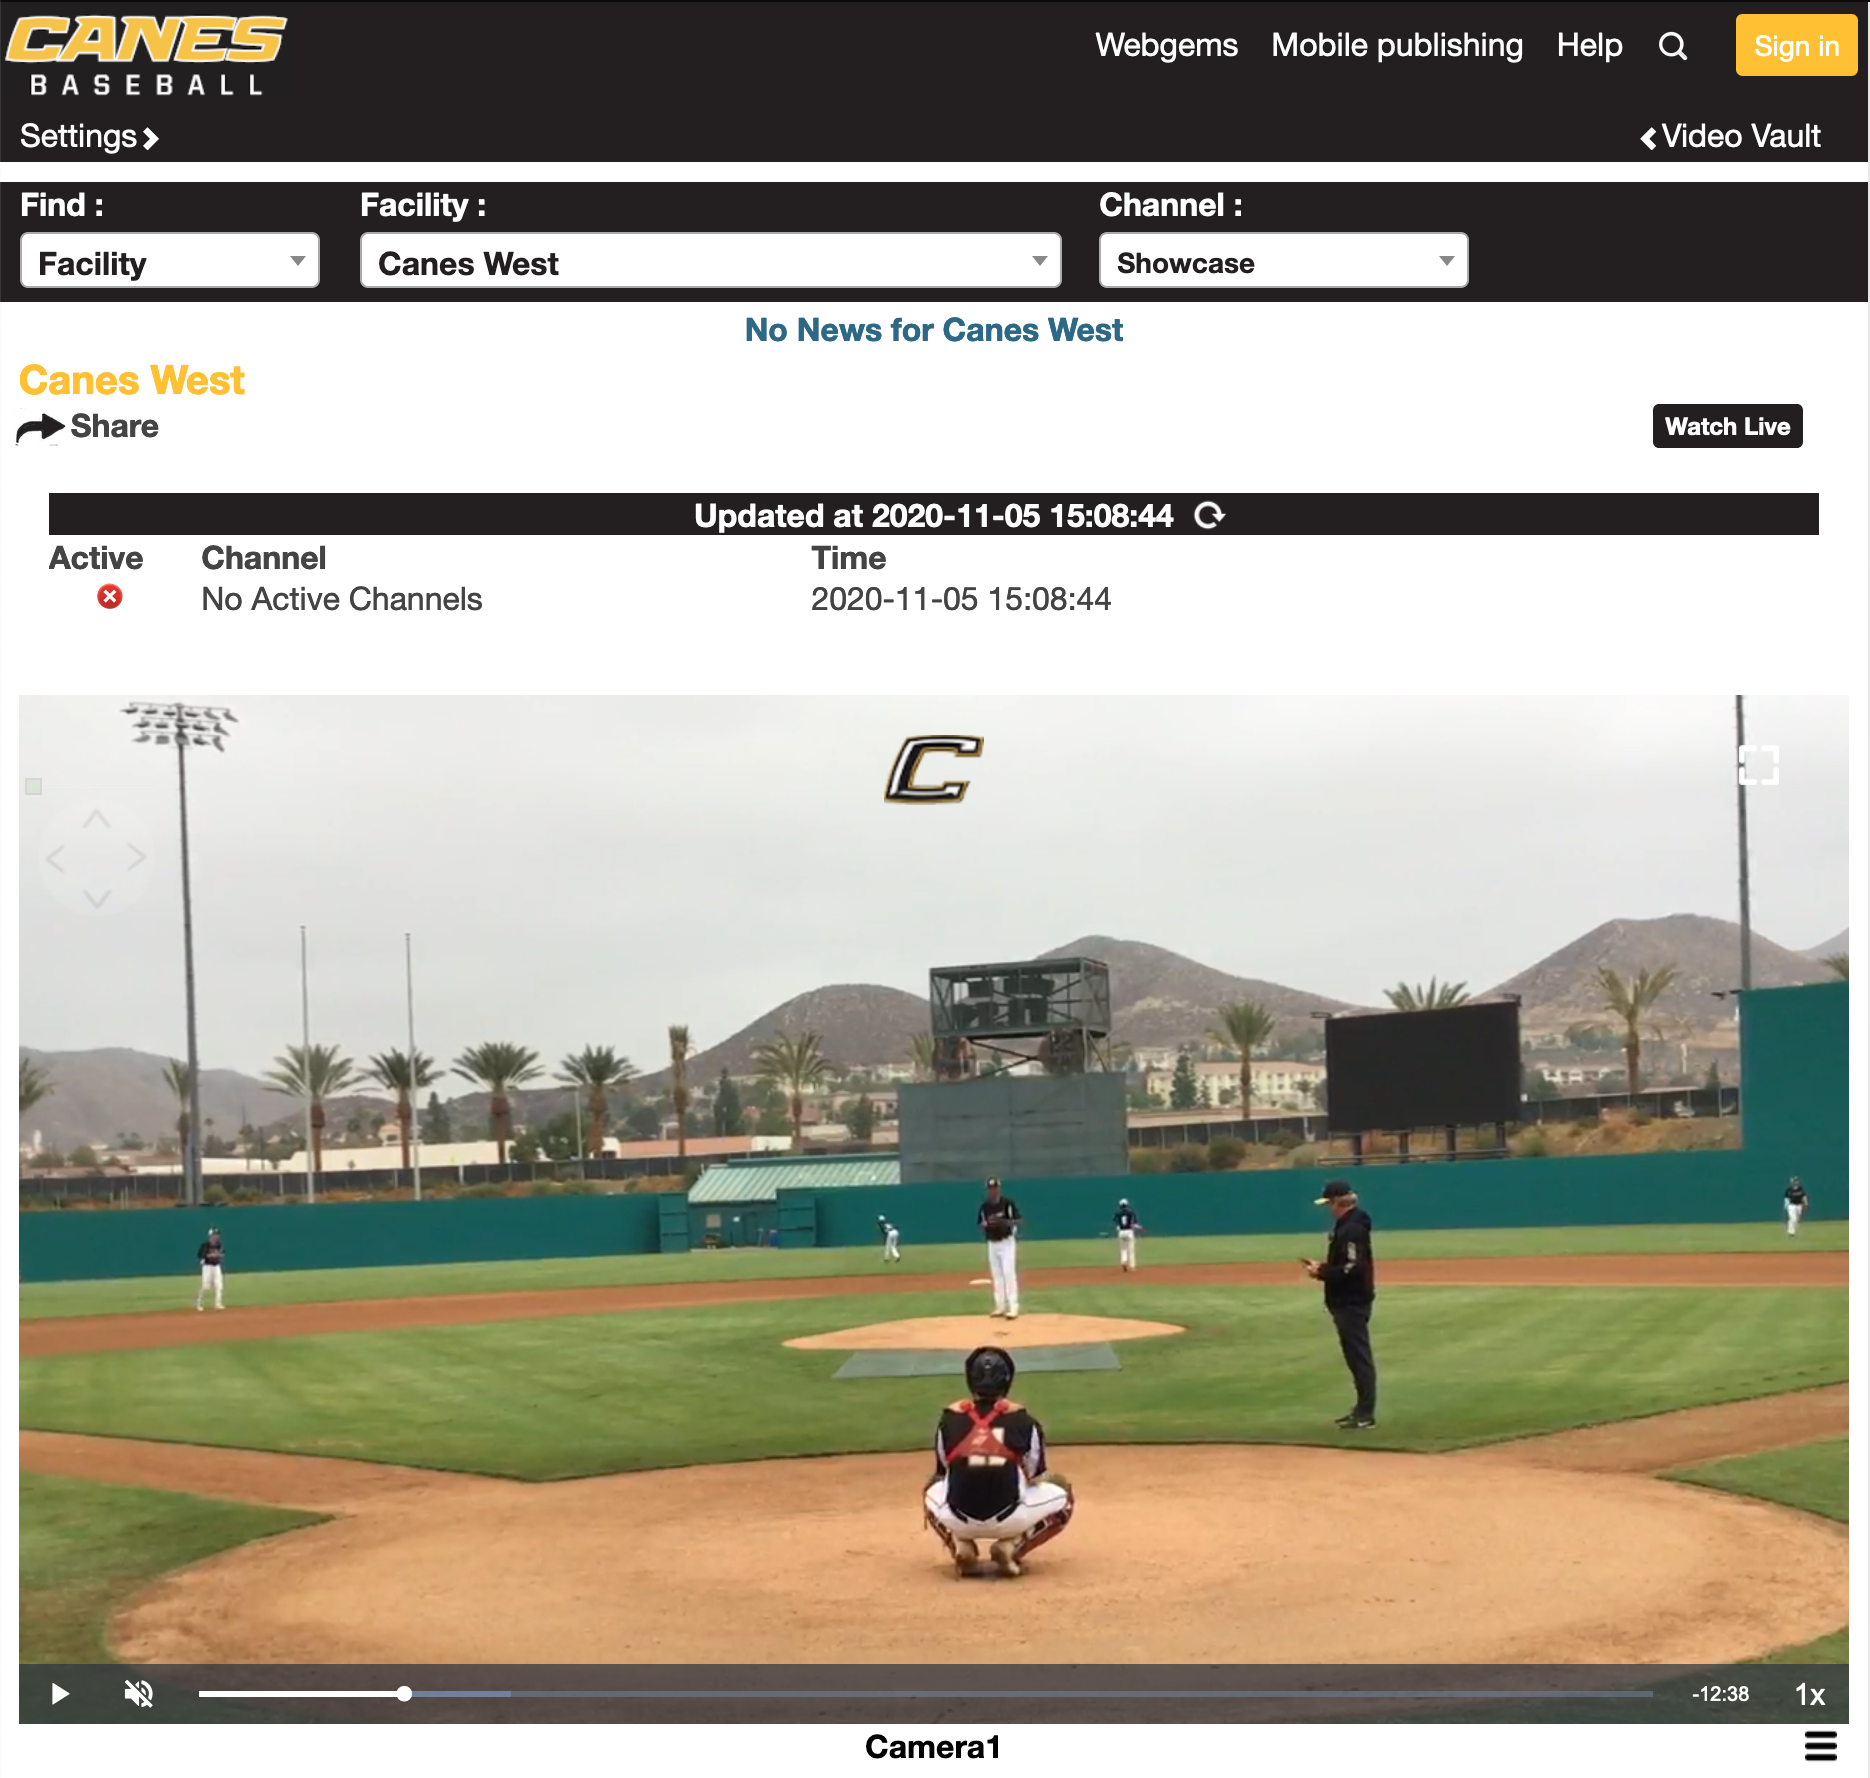 GameCam Youth Sports Video Live Video Streaming and On Demand for Sports